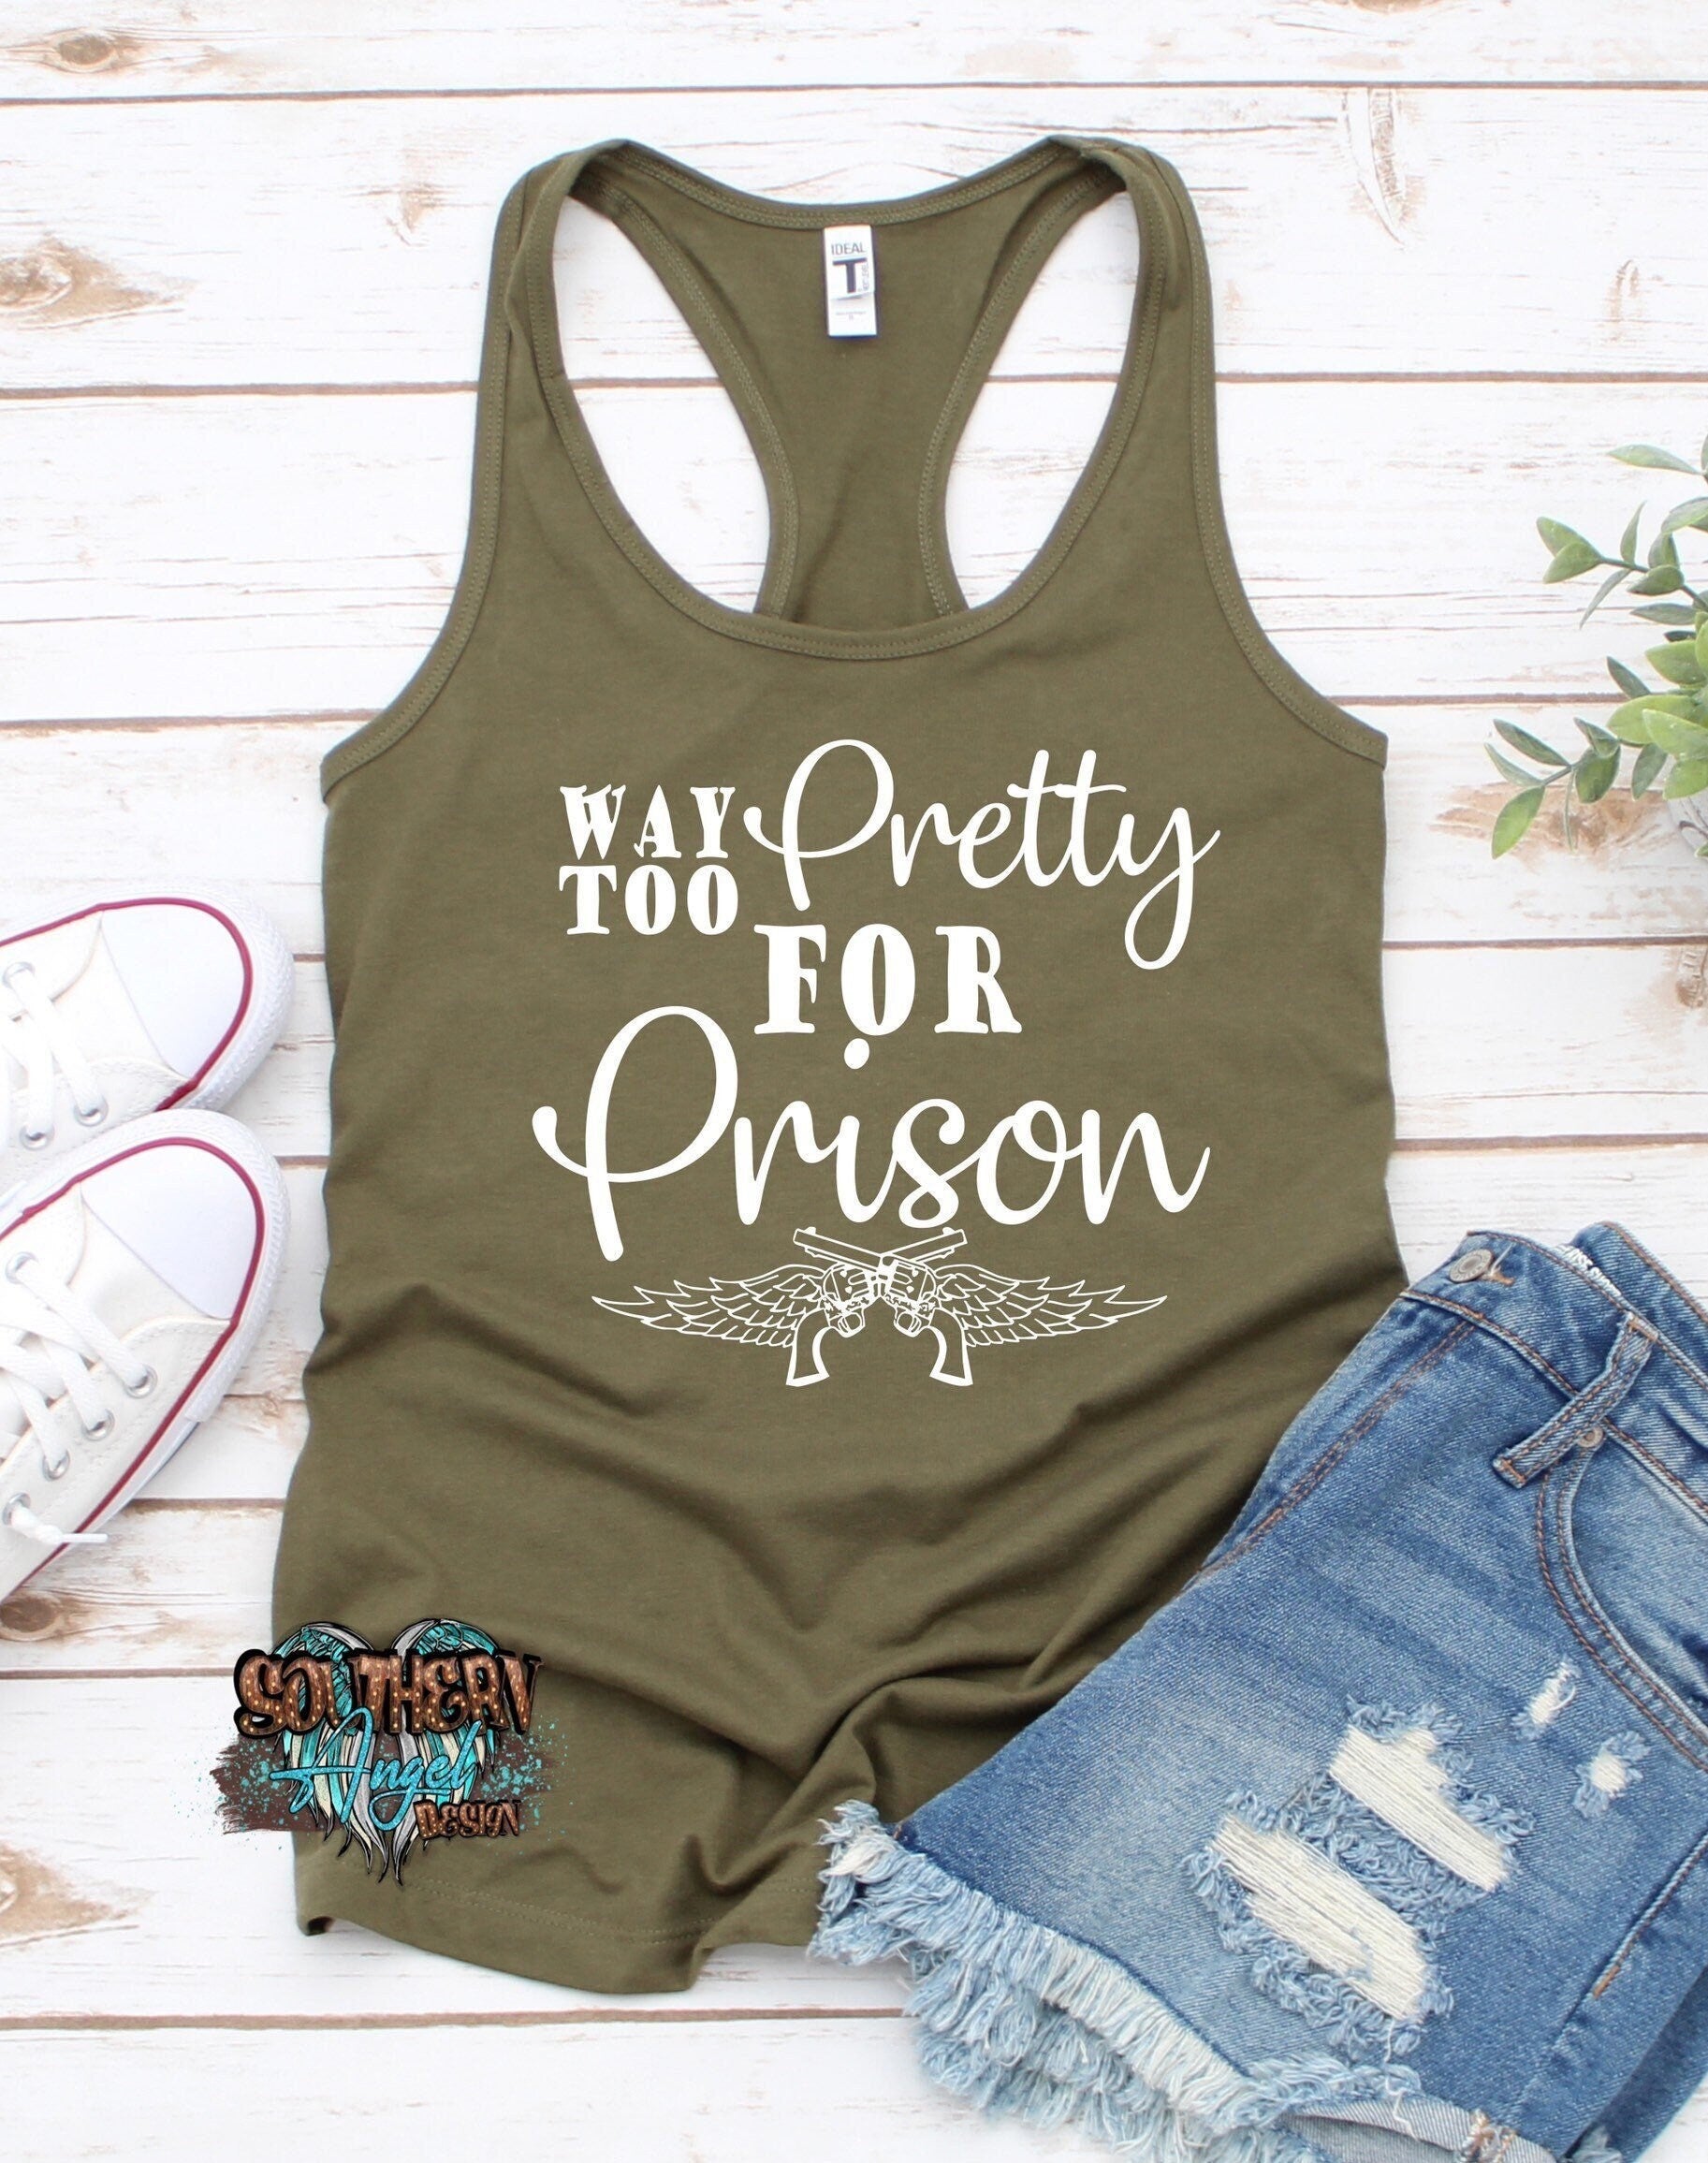 Country music tank | Country girl tank | Country festival | Country concert | Rodeo tank | Drinking